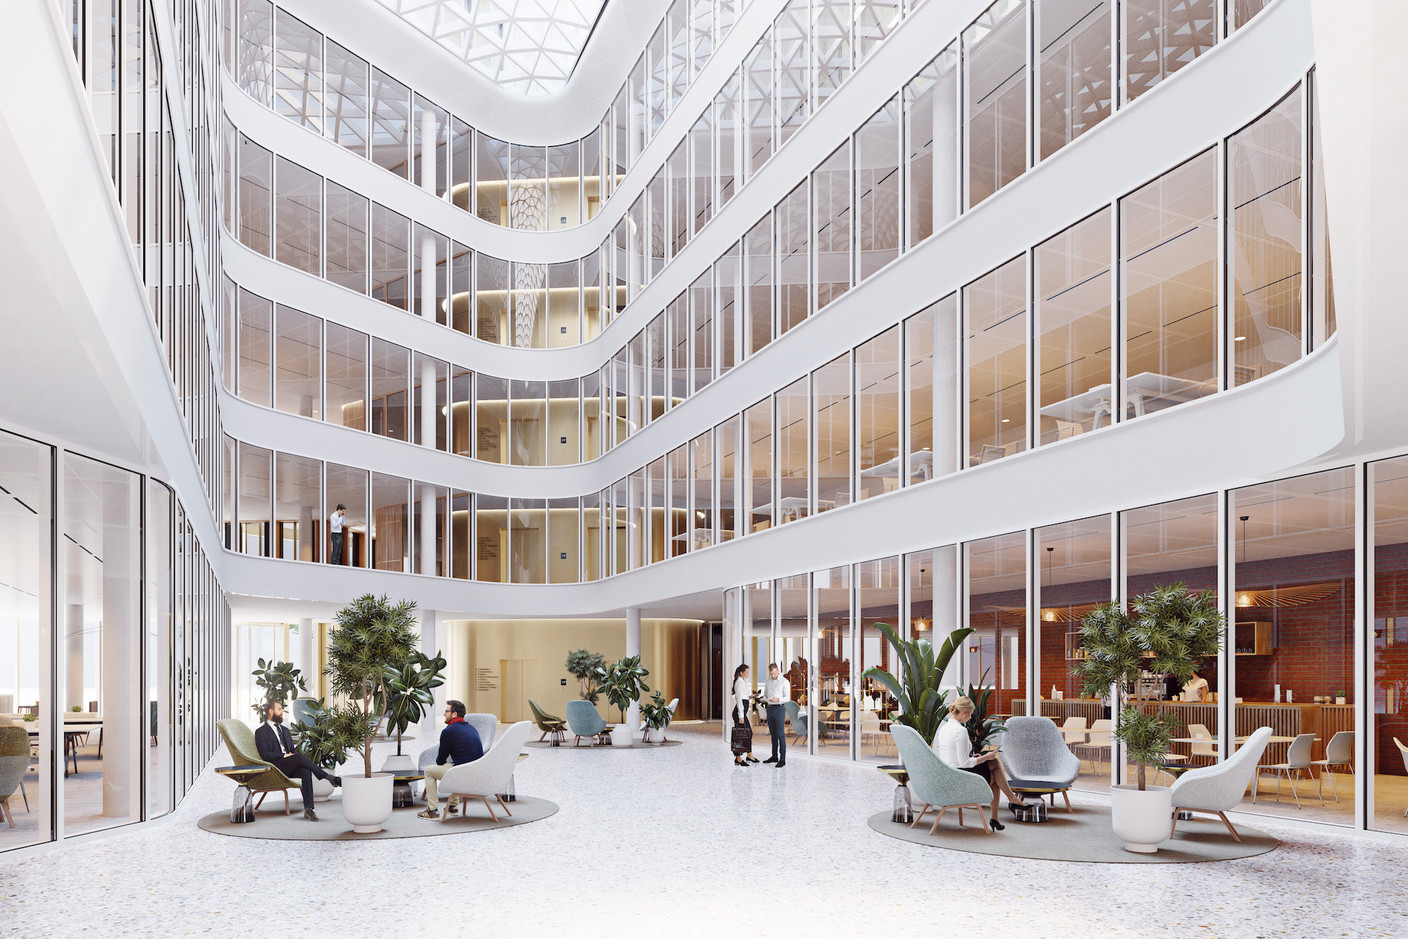 Inside the building, a large atrium will be covered by a glass roof. Illustrations: IKO Real Estate – Thomas & Piron